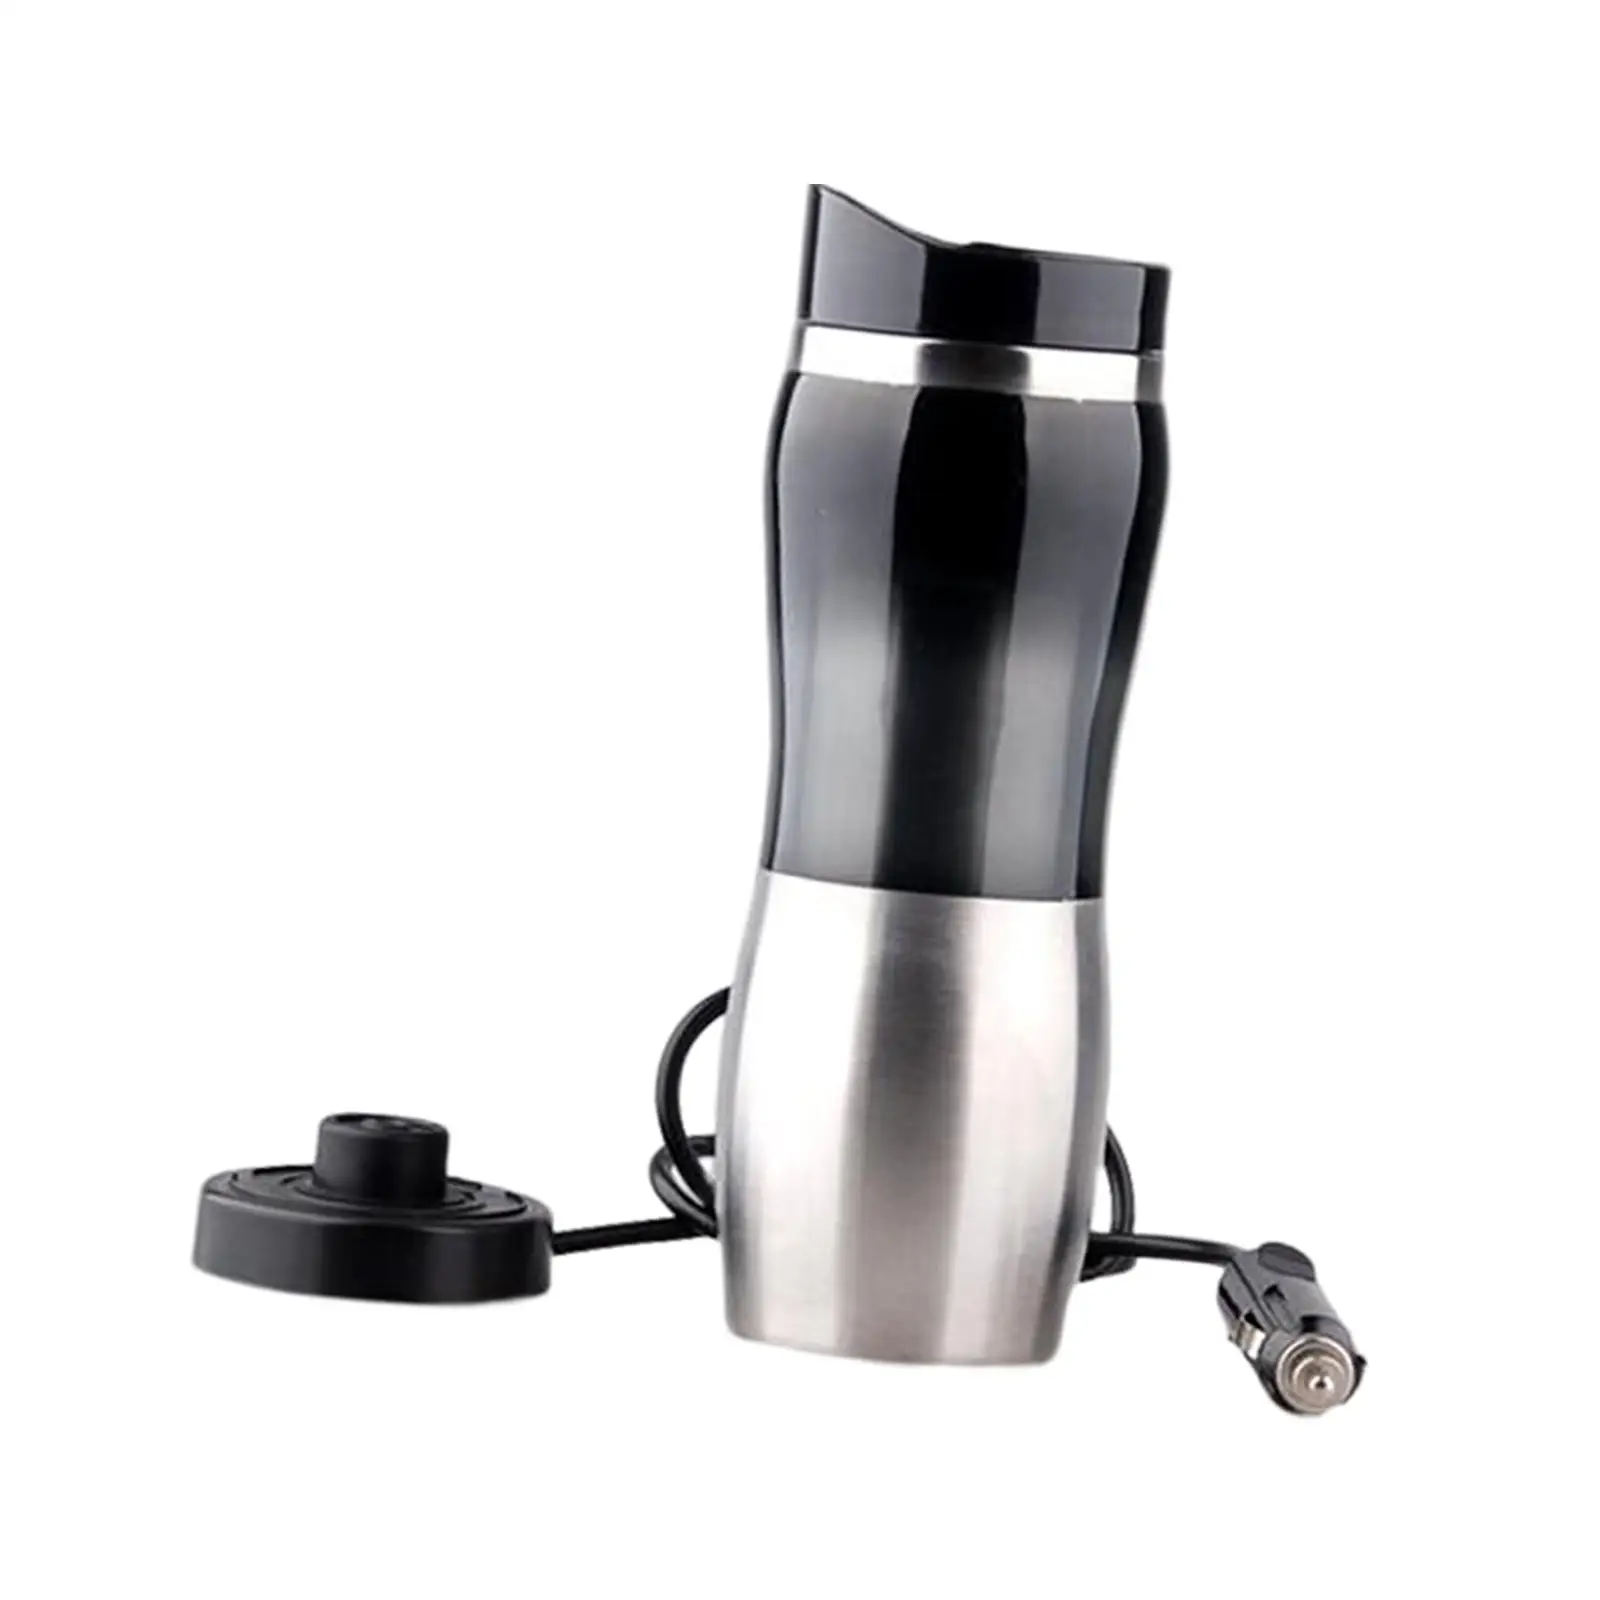  Kettle/ 12V 400ml/ Portable /Stainless Steel/ Electric Car Water Heater/ Auto Heating Bottle for Hot Water Coffee Making Milk